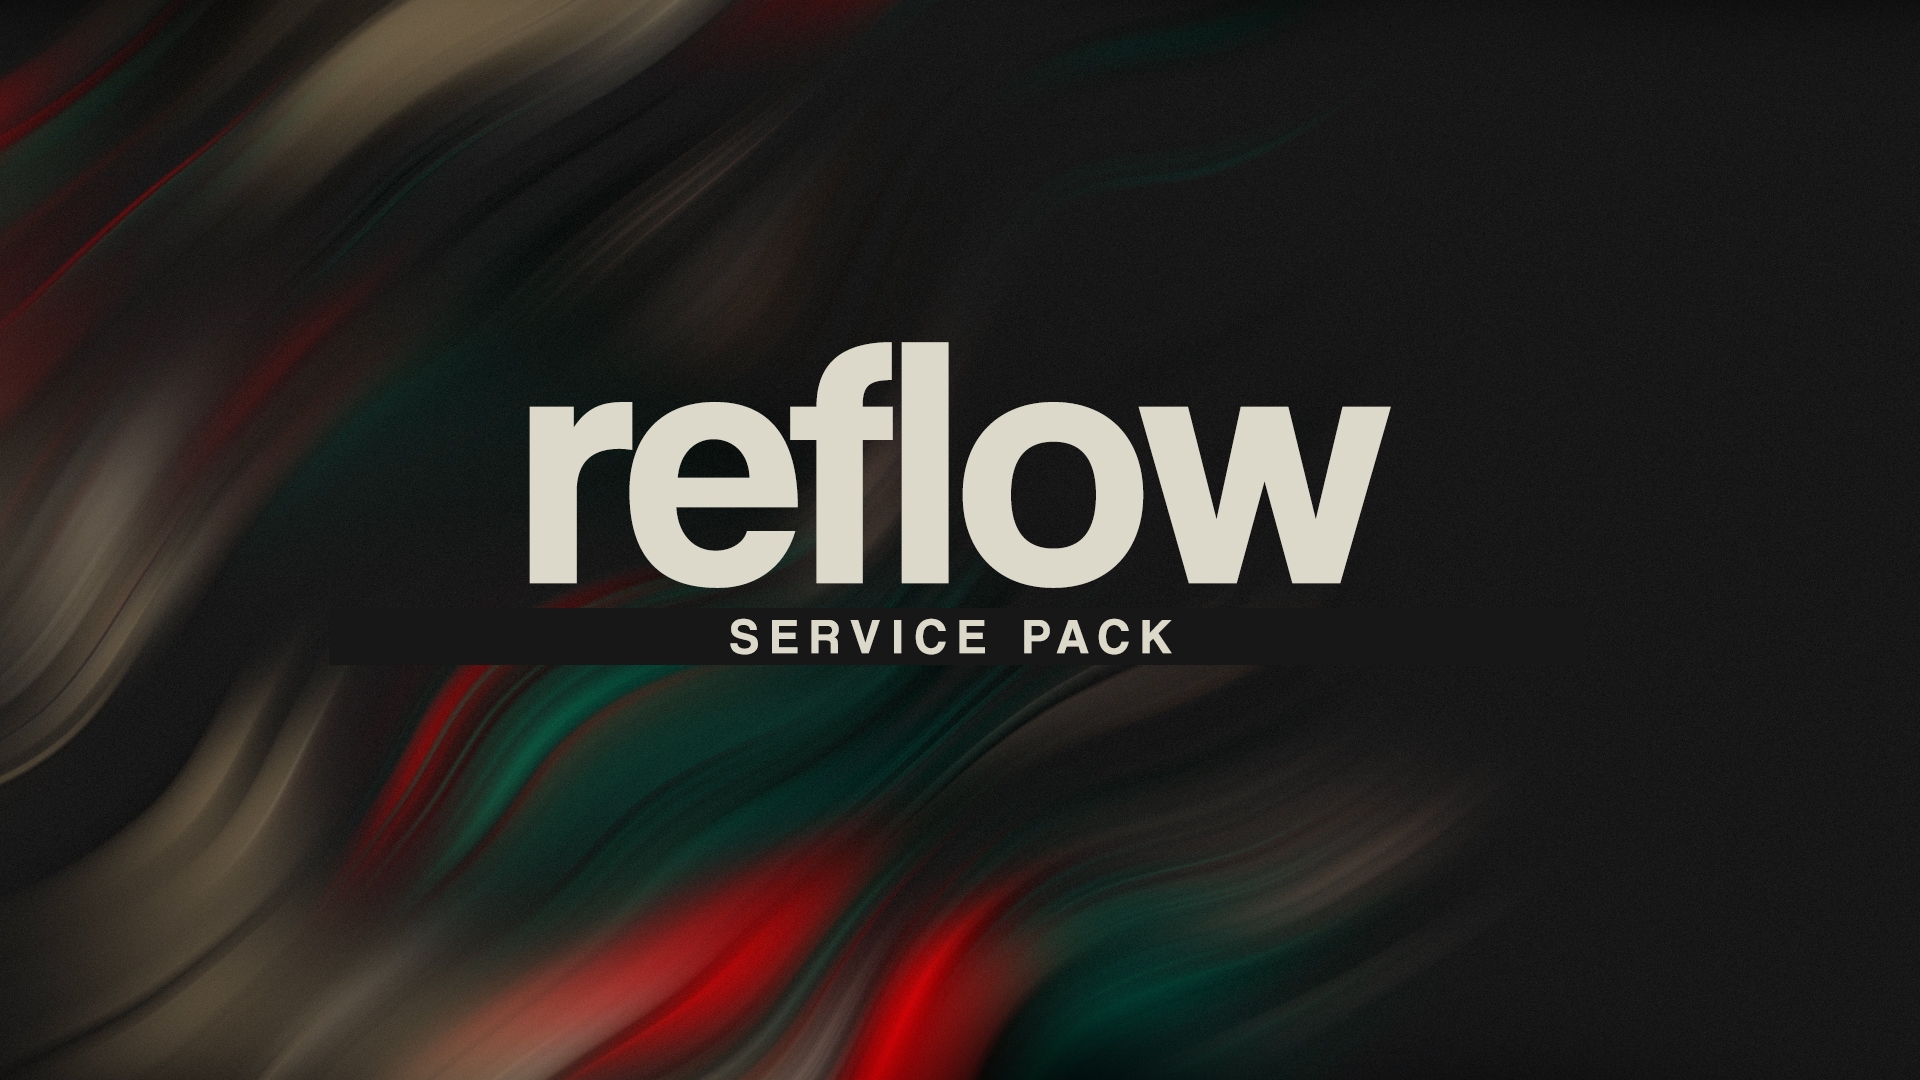 Reflow Service Pack